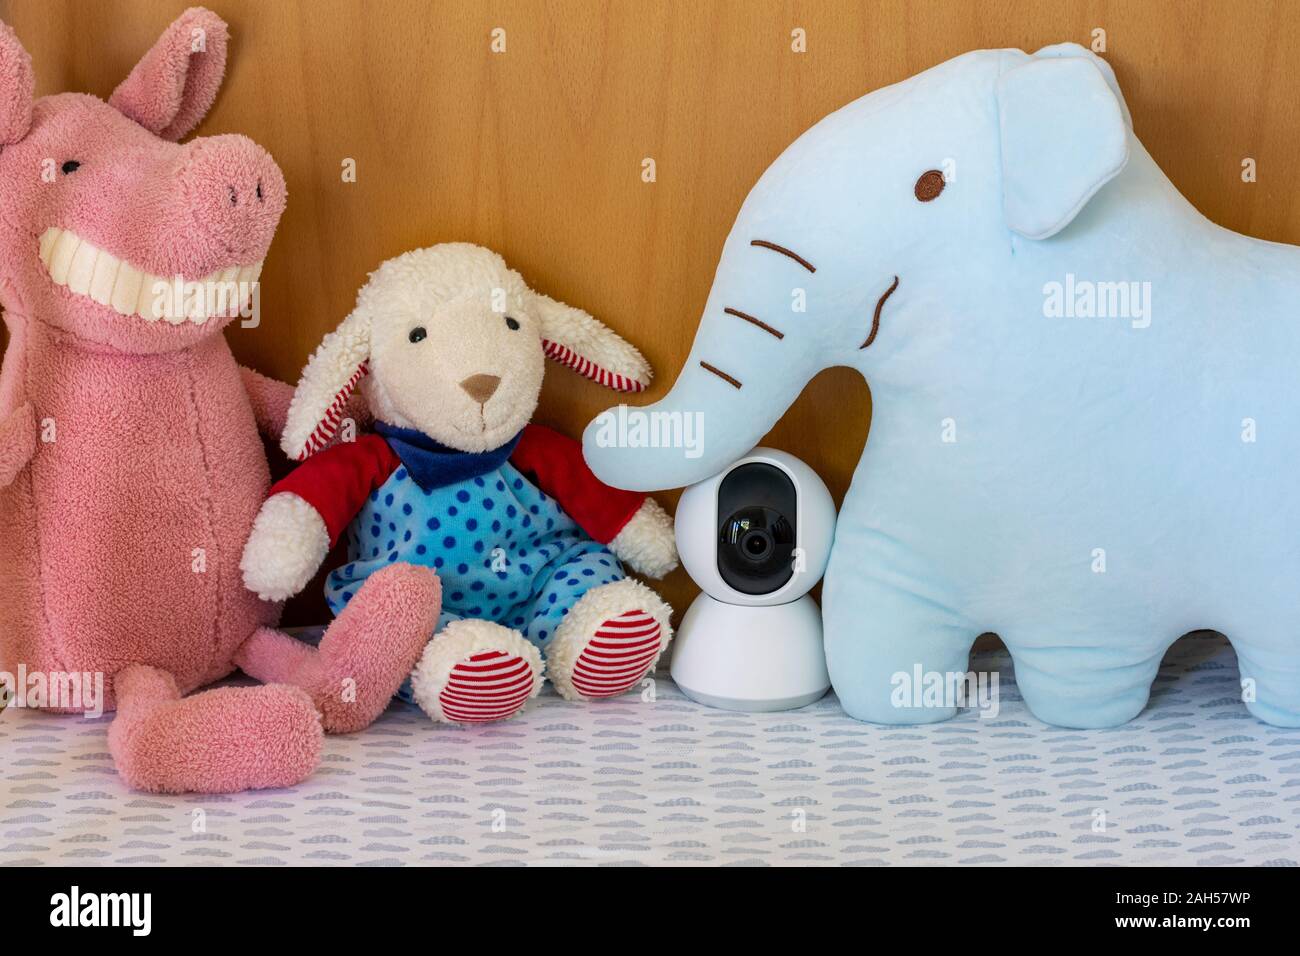 IP camera monitoring in a baby crib with children toys Stock Photo